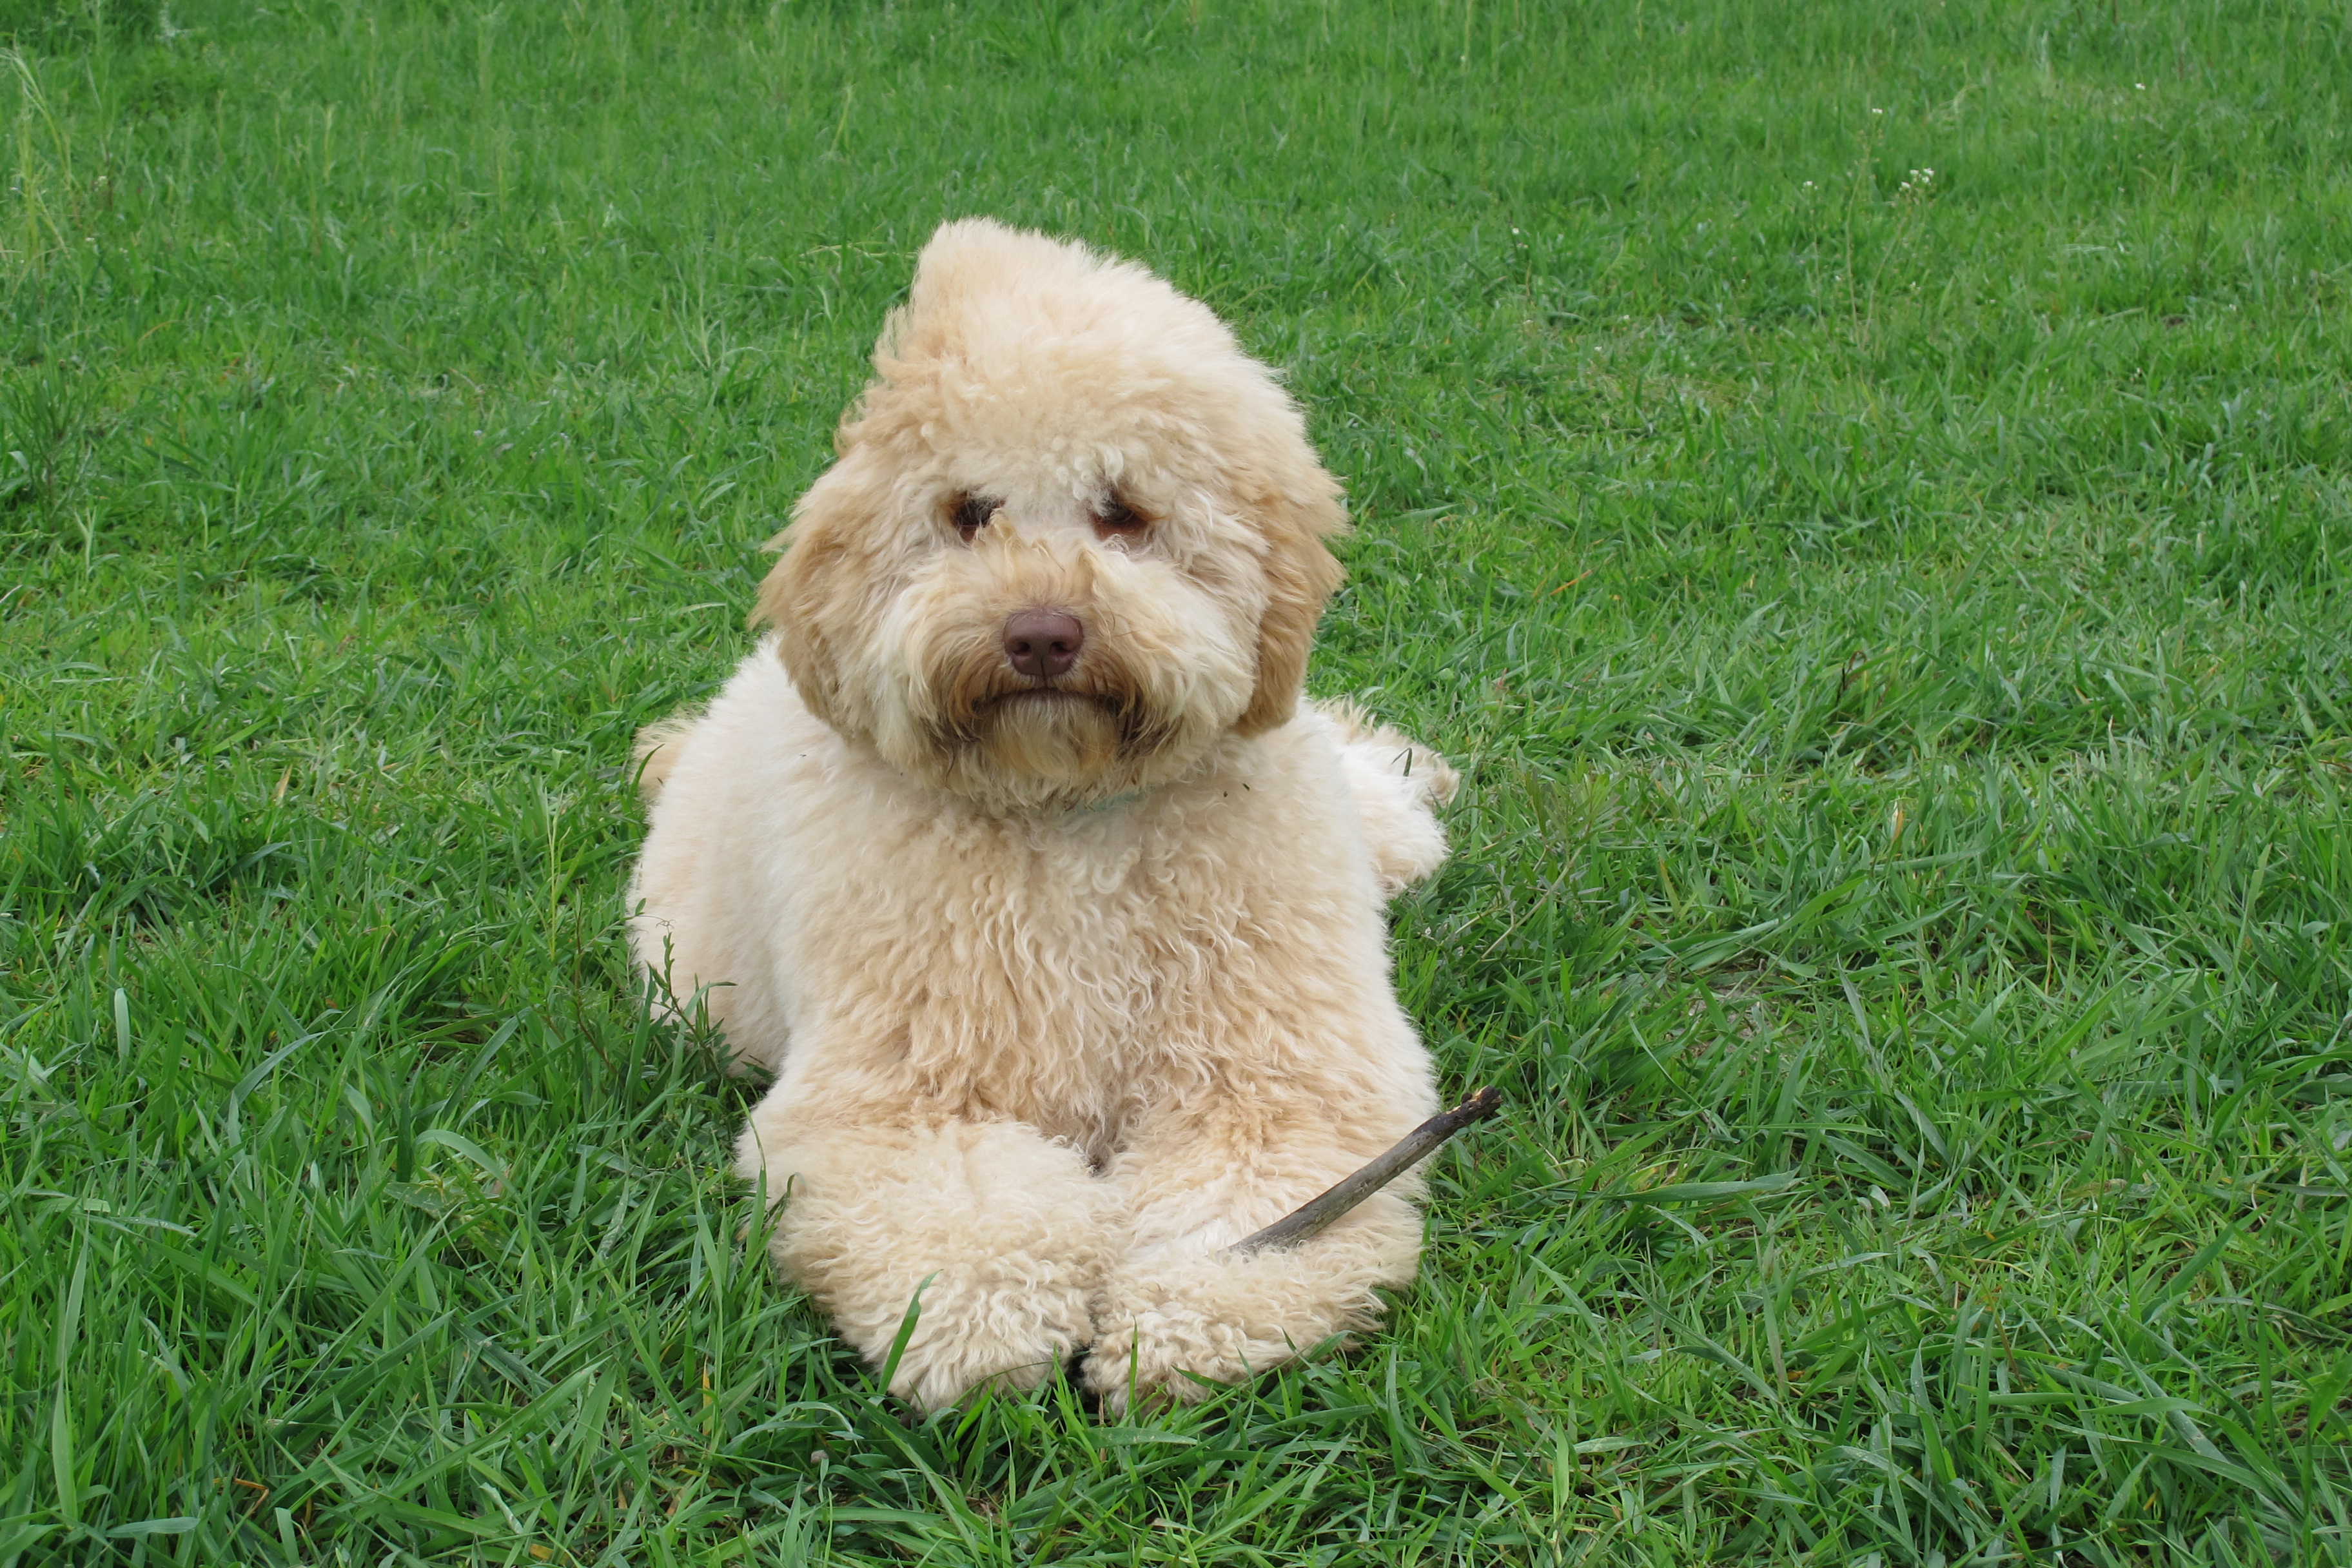 THE STORY OF AN AUTHENTIC AUSTRALIAN LABRADOODLE